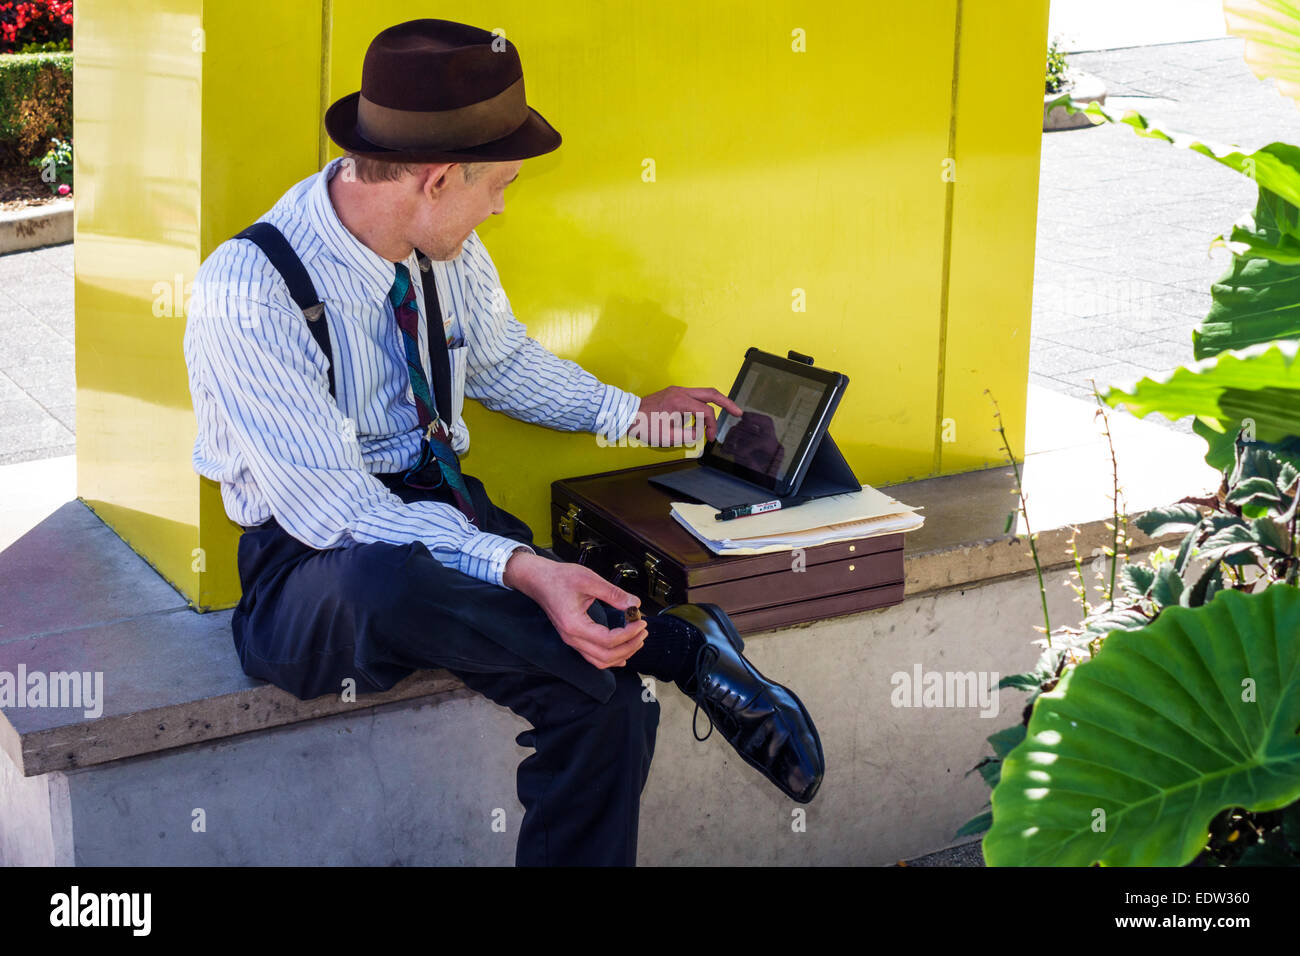 Chicago Illinois, North River, Clark Street, Mann Männer männlich, Gangster, Mobster, Outfit, Guide, using, Tablet, iPad, IL140907009 Stockfoto